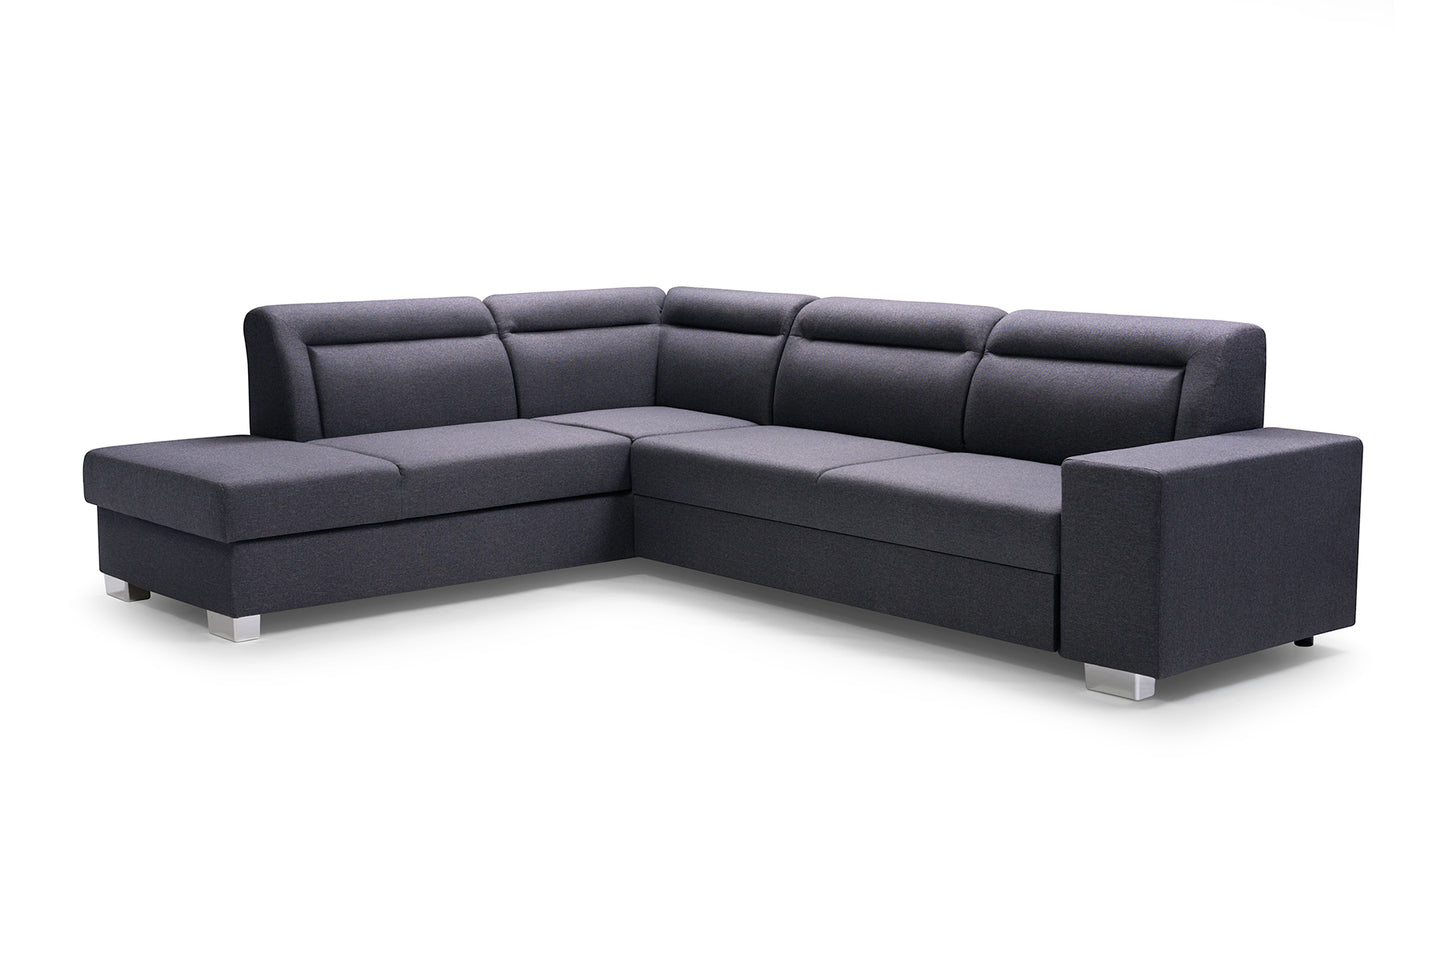 DENVER - Modern Corner Sofa Bed with Storage and Pull Out Bed >285x220cm<